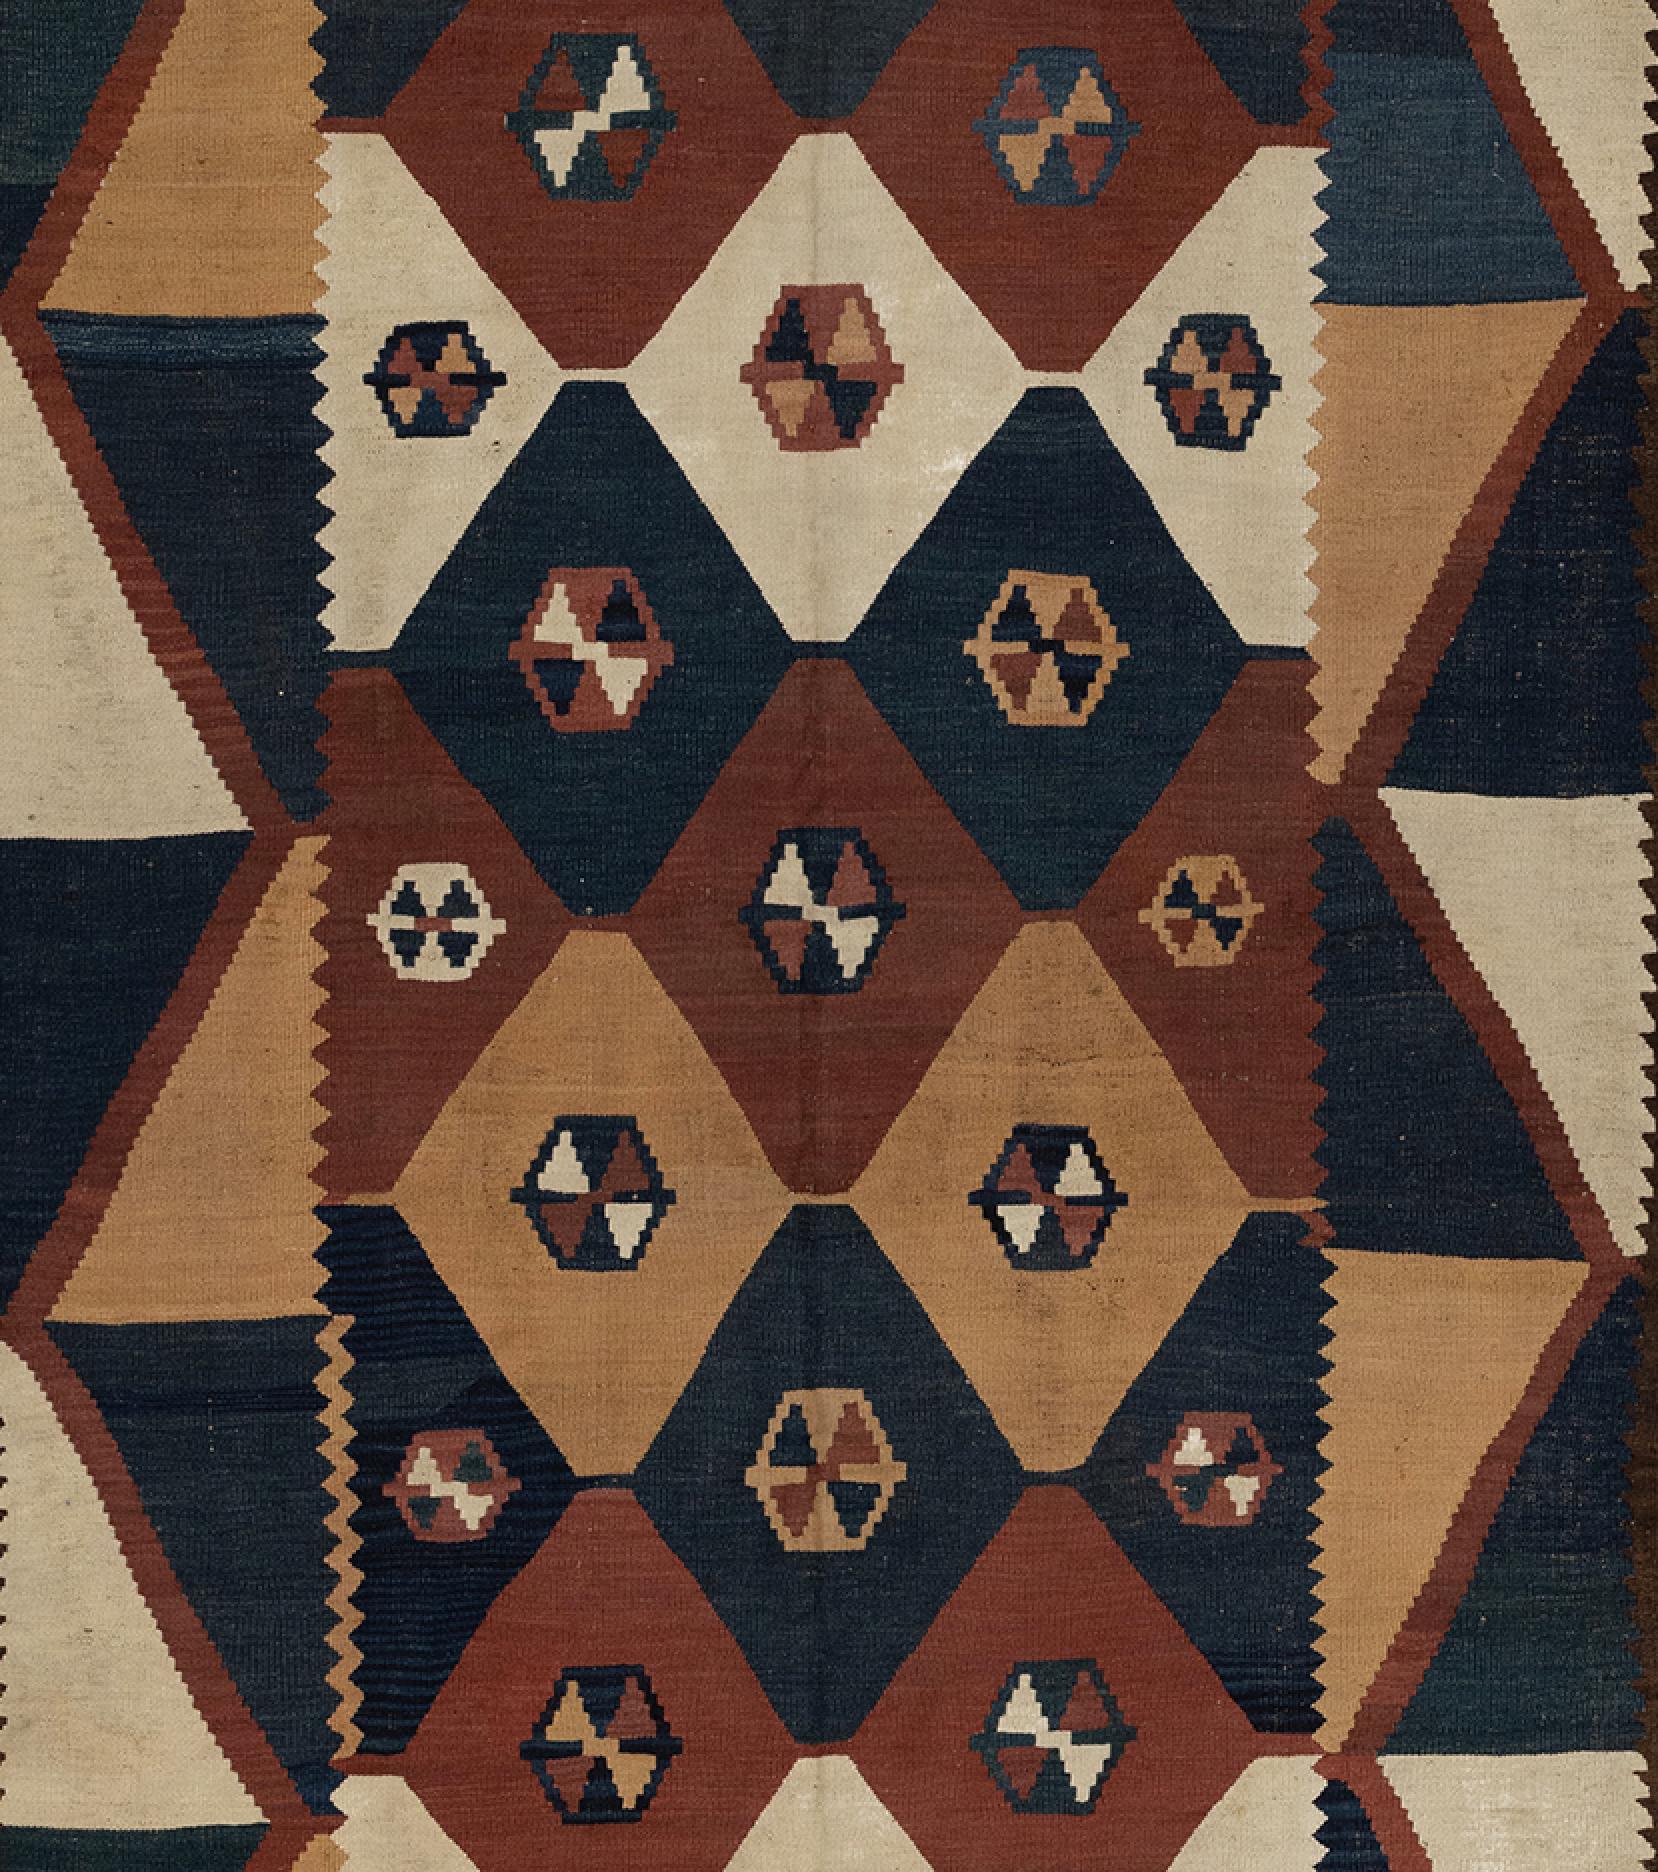 This is an antique Afghan Maymana Kilim from Bamyan area of Afghanistan, circa 1900s. The colors are made with natural vegetable dyes in beautiful indigo blues, yellows, browns and ivory and rust. Featuring geometric nomadic design on a large-scale.